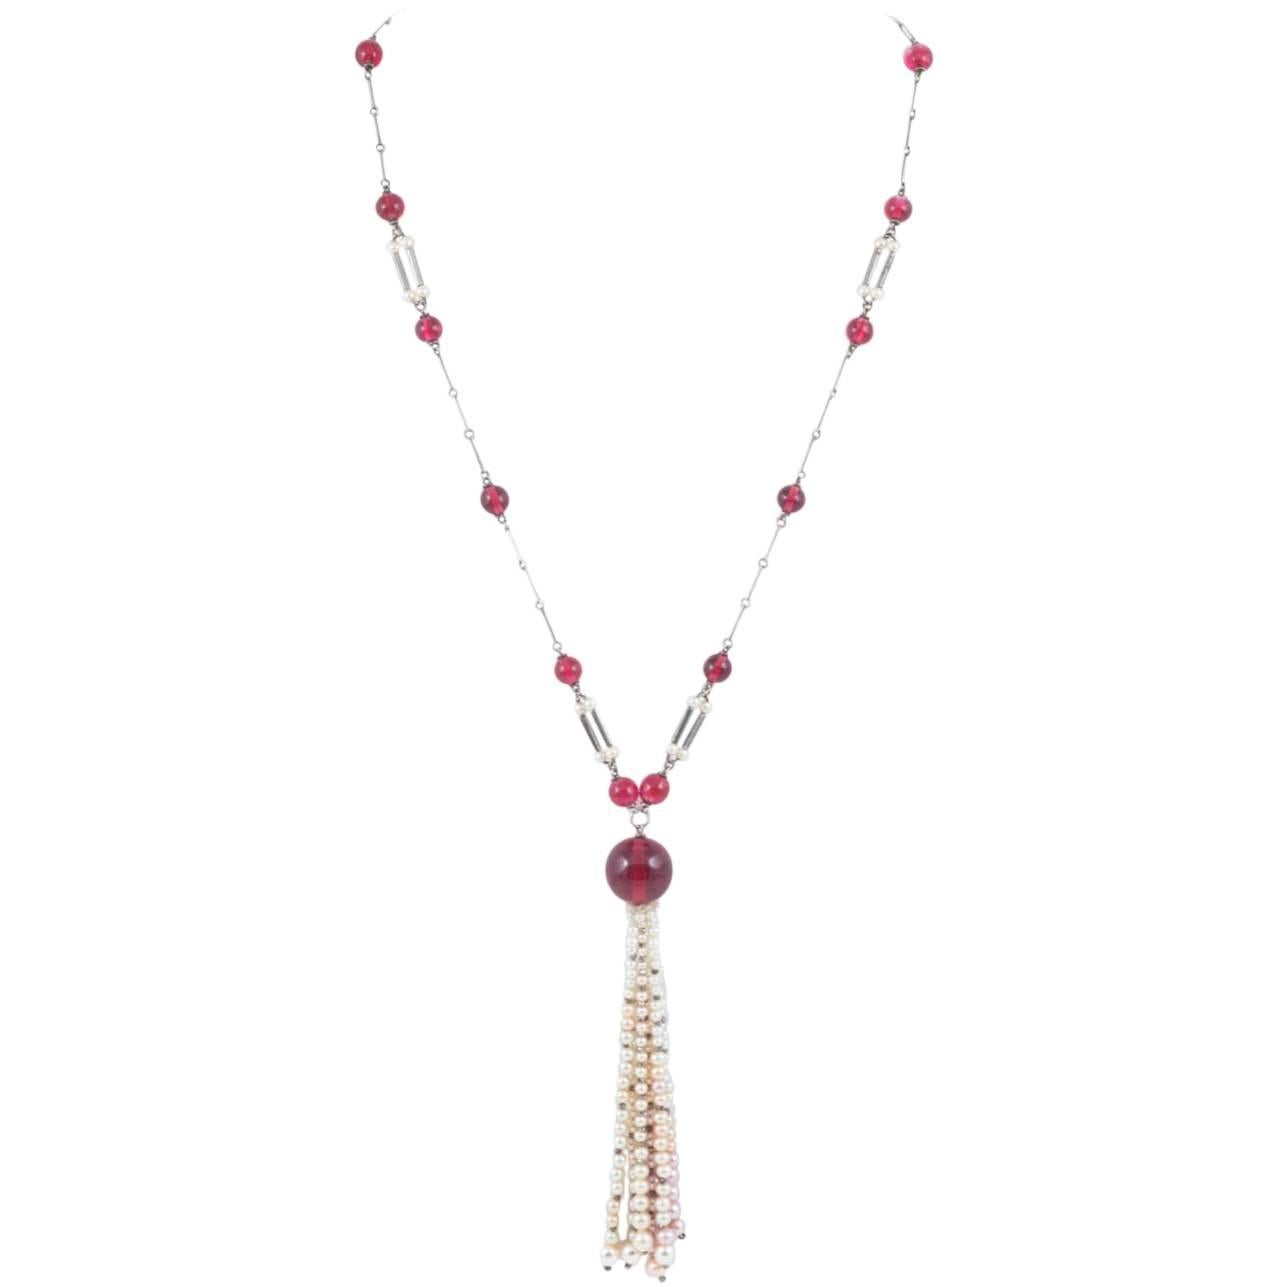 Art Deco cranberry glass and pearl sautoir, with unmarked silver links. 